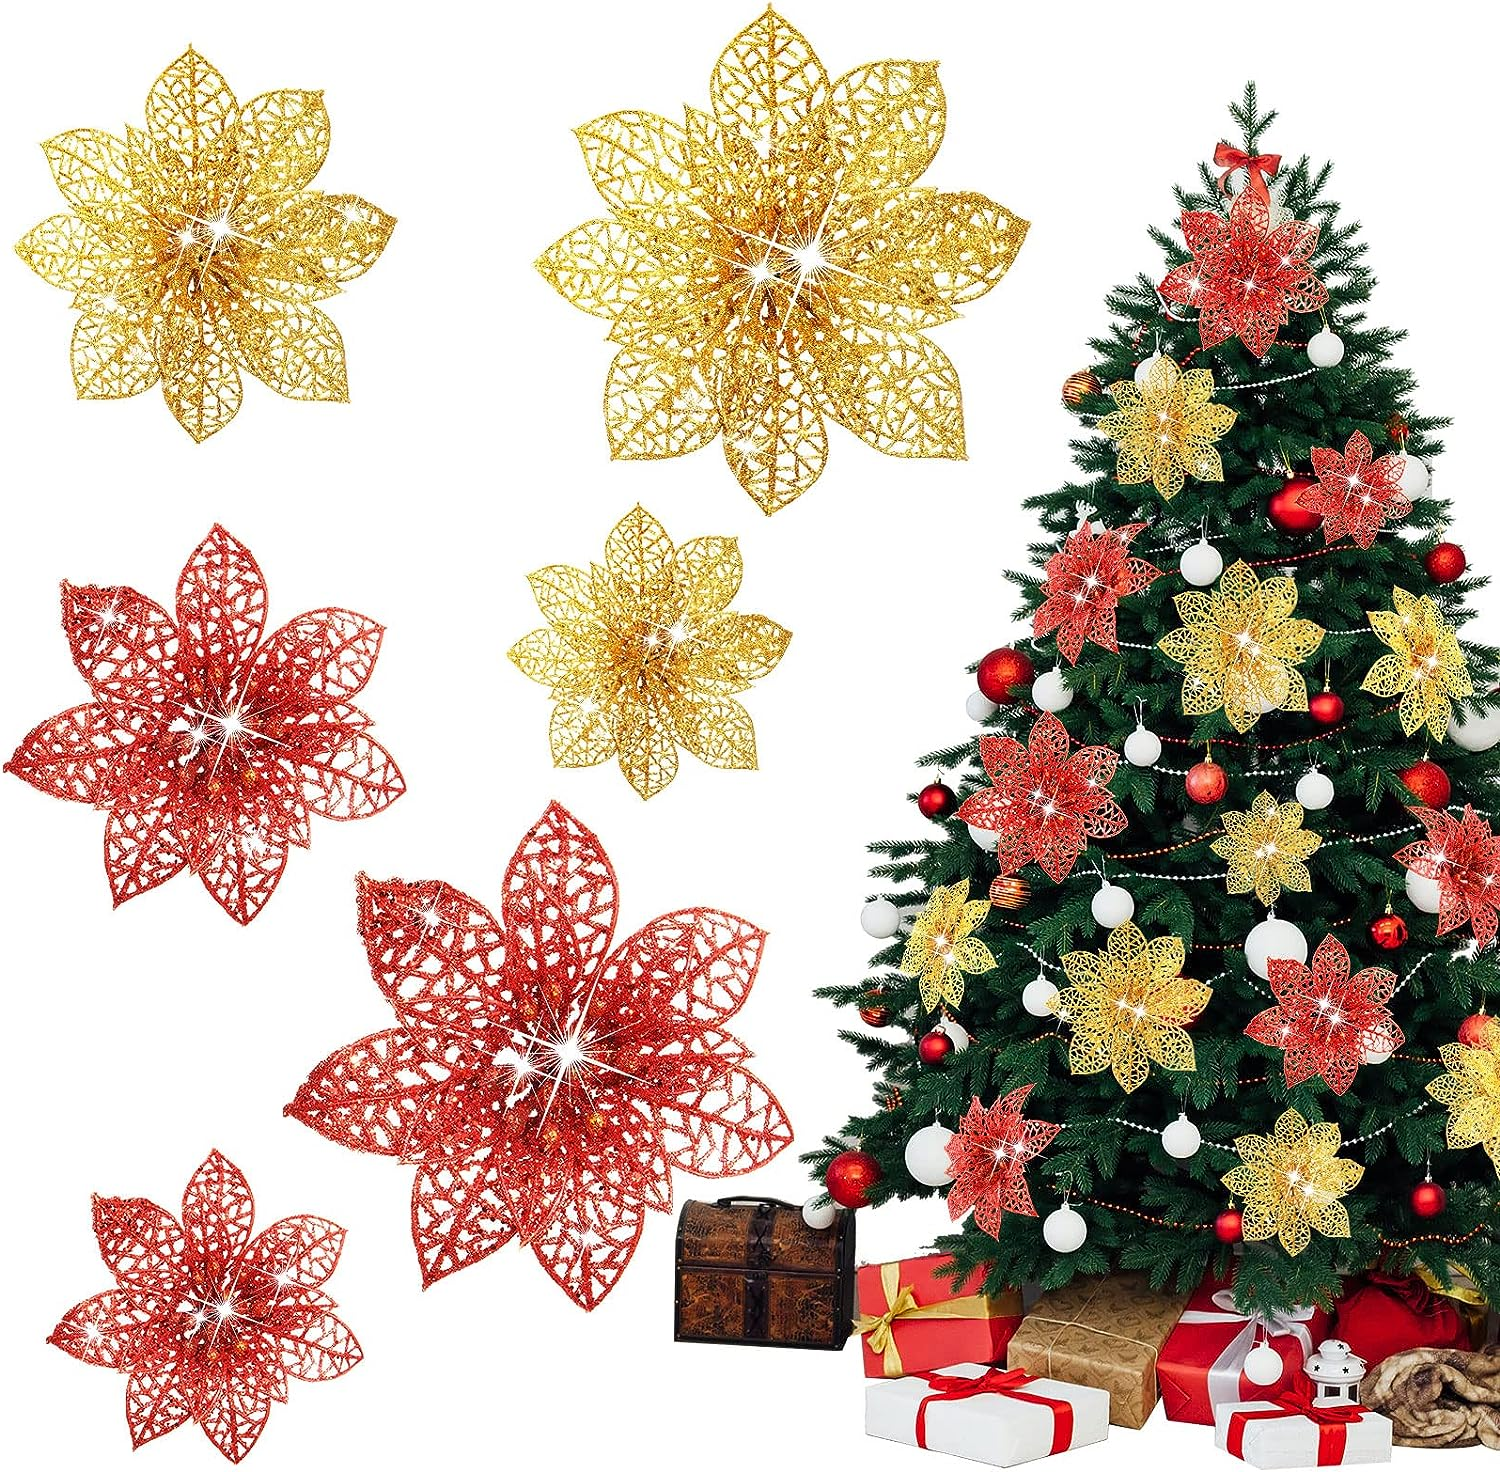 Christmas-36 pack glitter poinsettia Christmas flowers decorations Christmas tree ornaments glitter gold 4